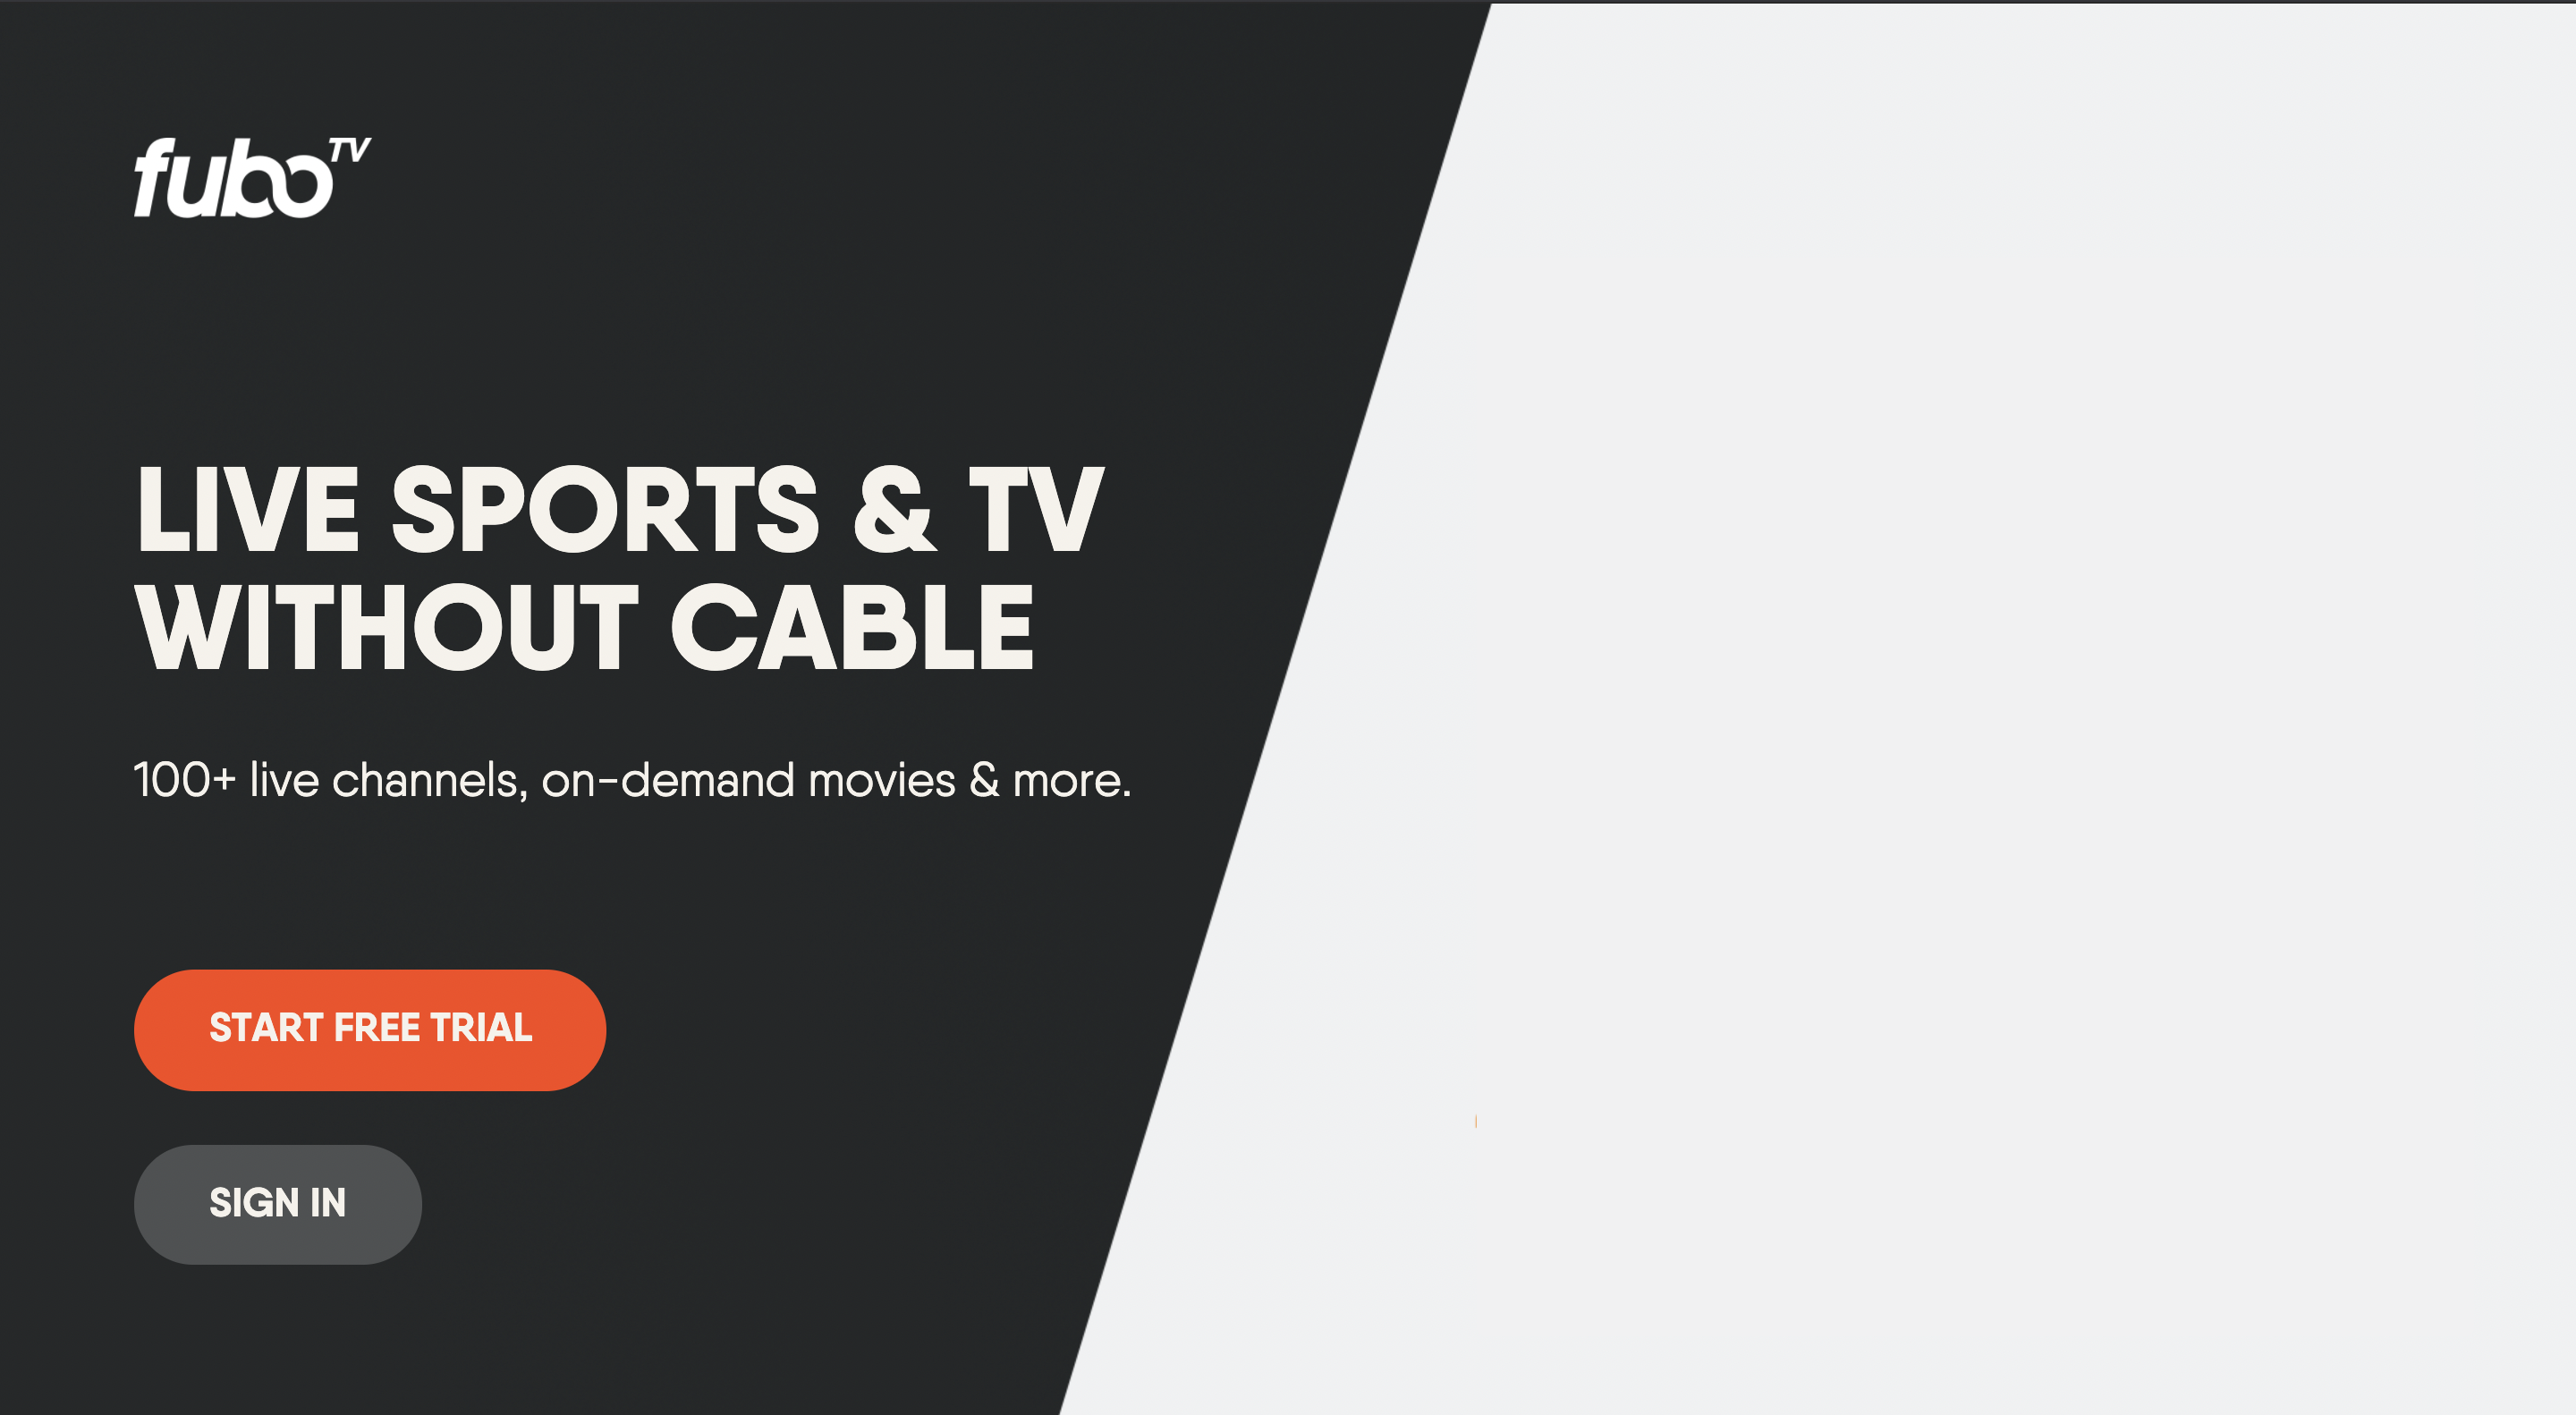 Sign in screen for the FuboTV app on Samsung TV with options to sign in or get signup details